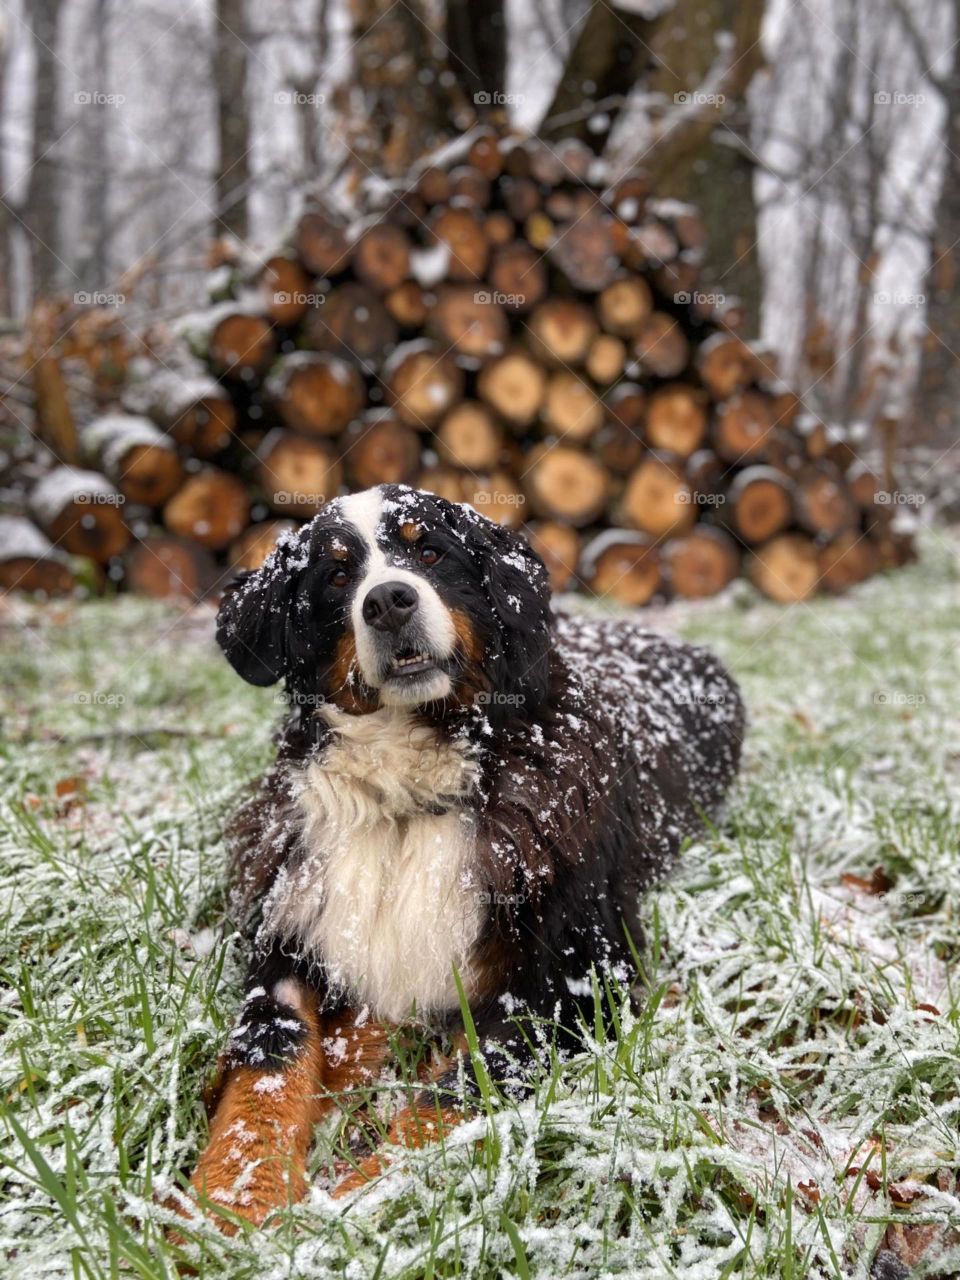 My Beautiful Bernese Mountain Dog in the snow! She likes it soooo much! Amazing! So happy and enjoyable 💪🏻